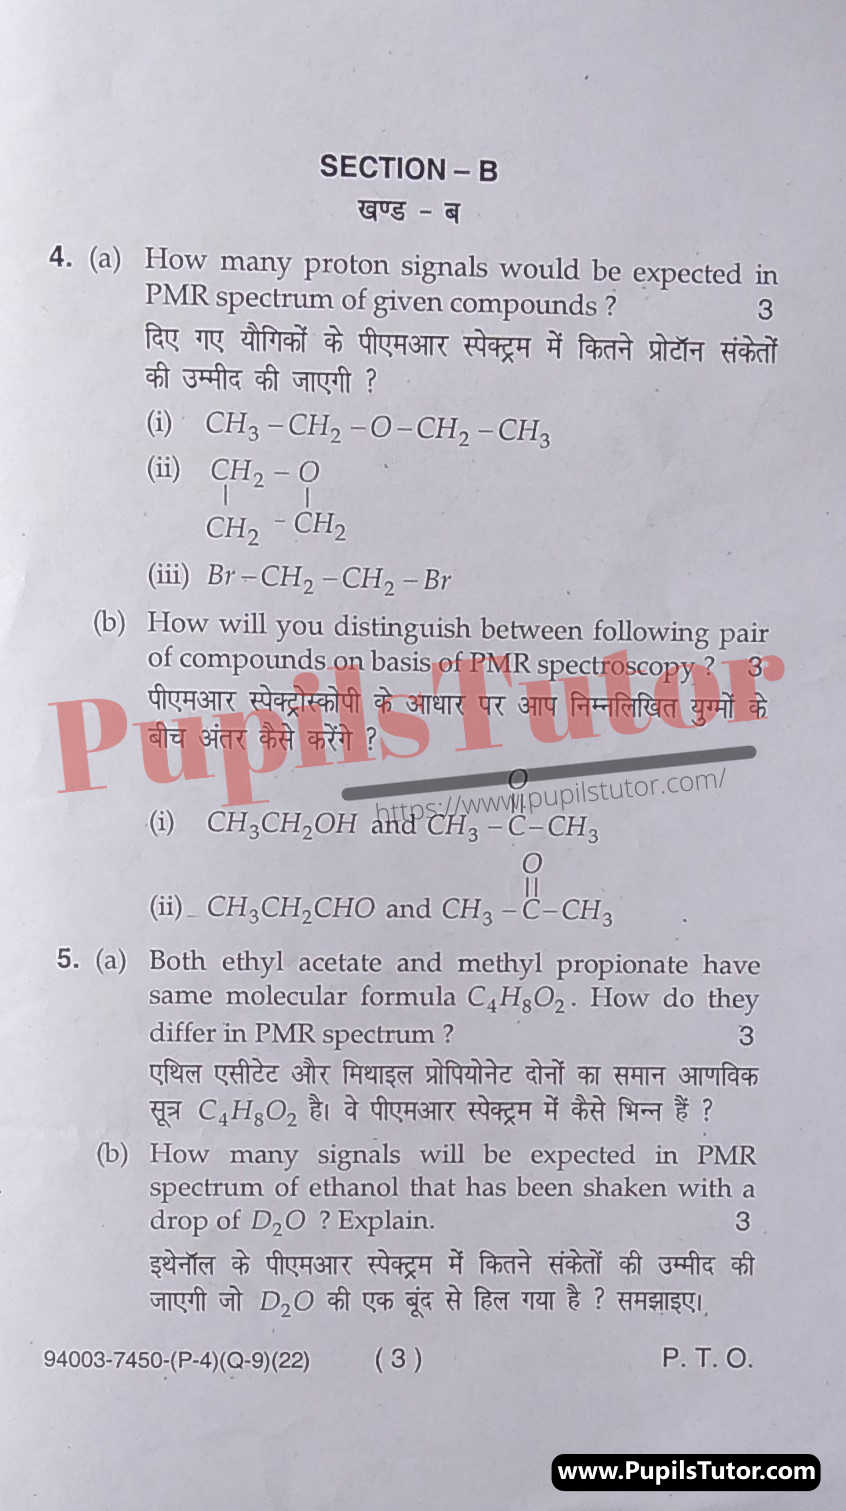 Free Download PDF Of M.D. University B.Sc. [Chemistry] 5th Semester Latest Question Paper For Organic Chemistry Subject (Page 3) - https://www.pupilstutor.com